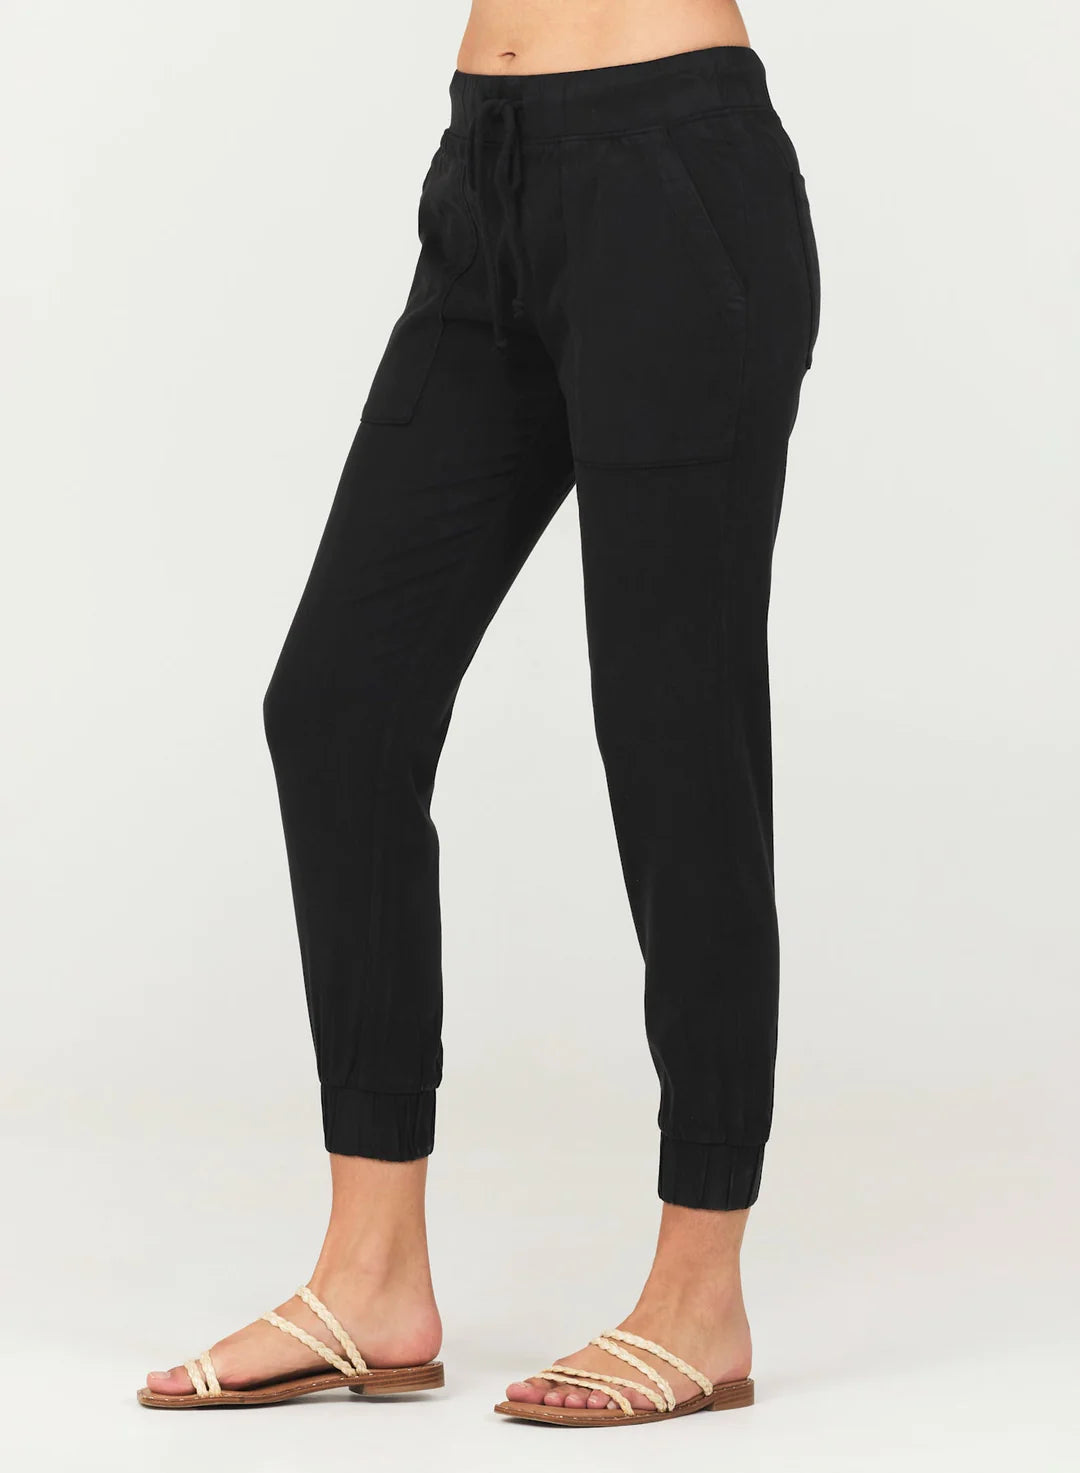 Black jogger trousers with four pockets and elasticated cuffs